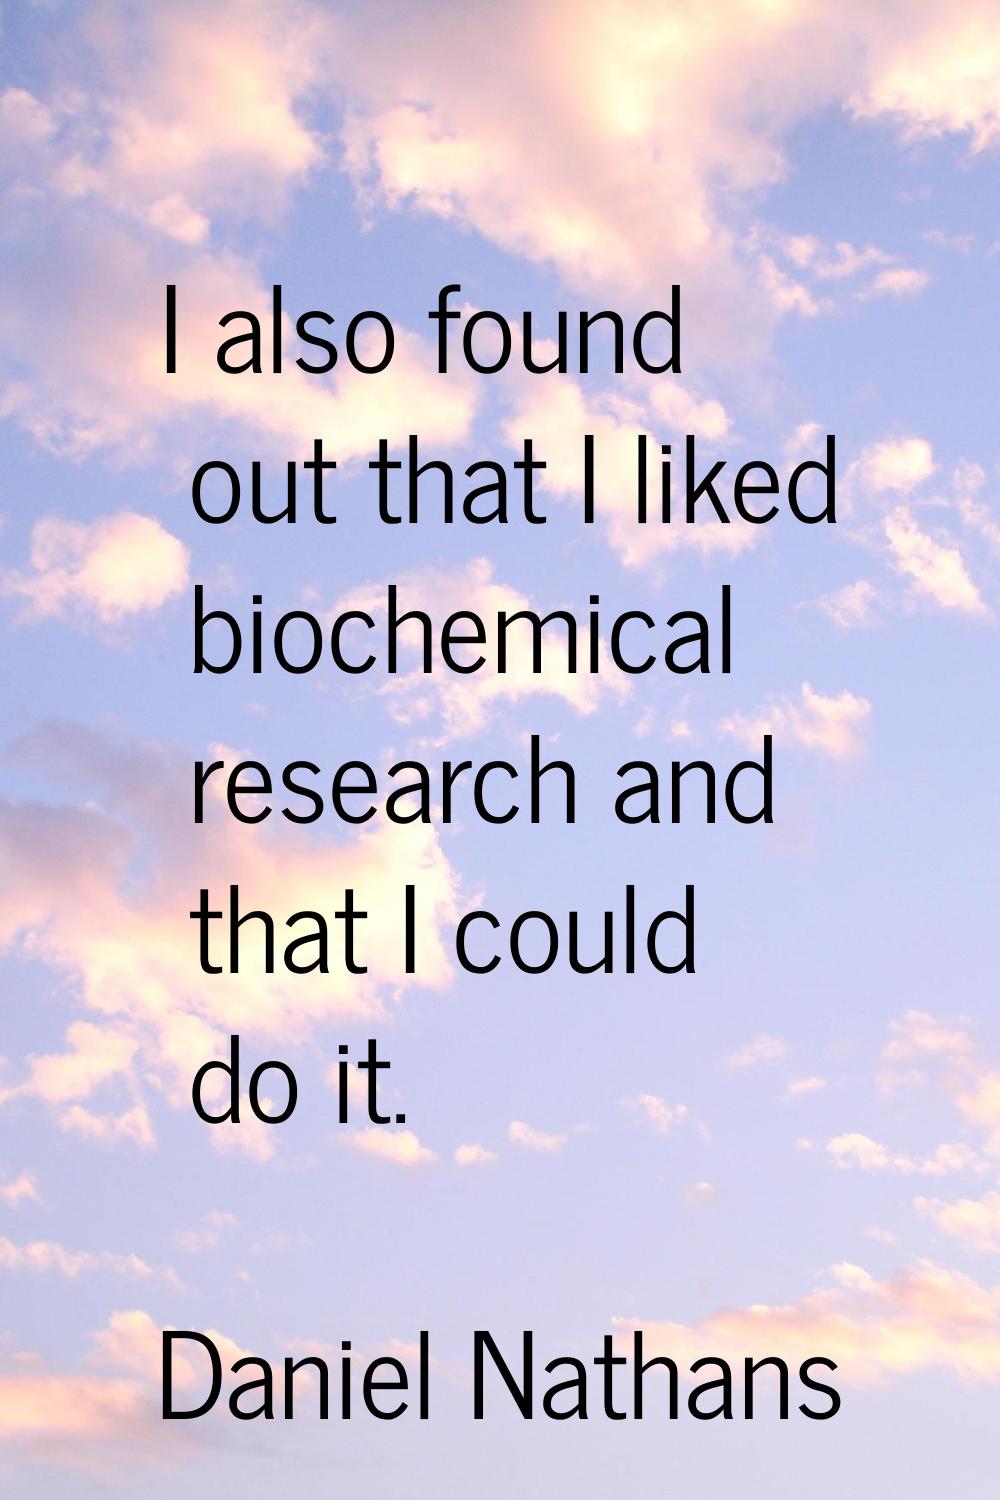 I also found out that I liked biochemical research and that I could do it.